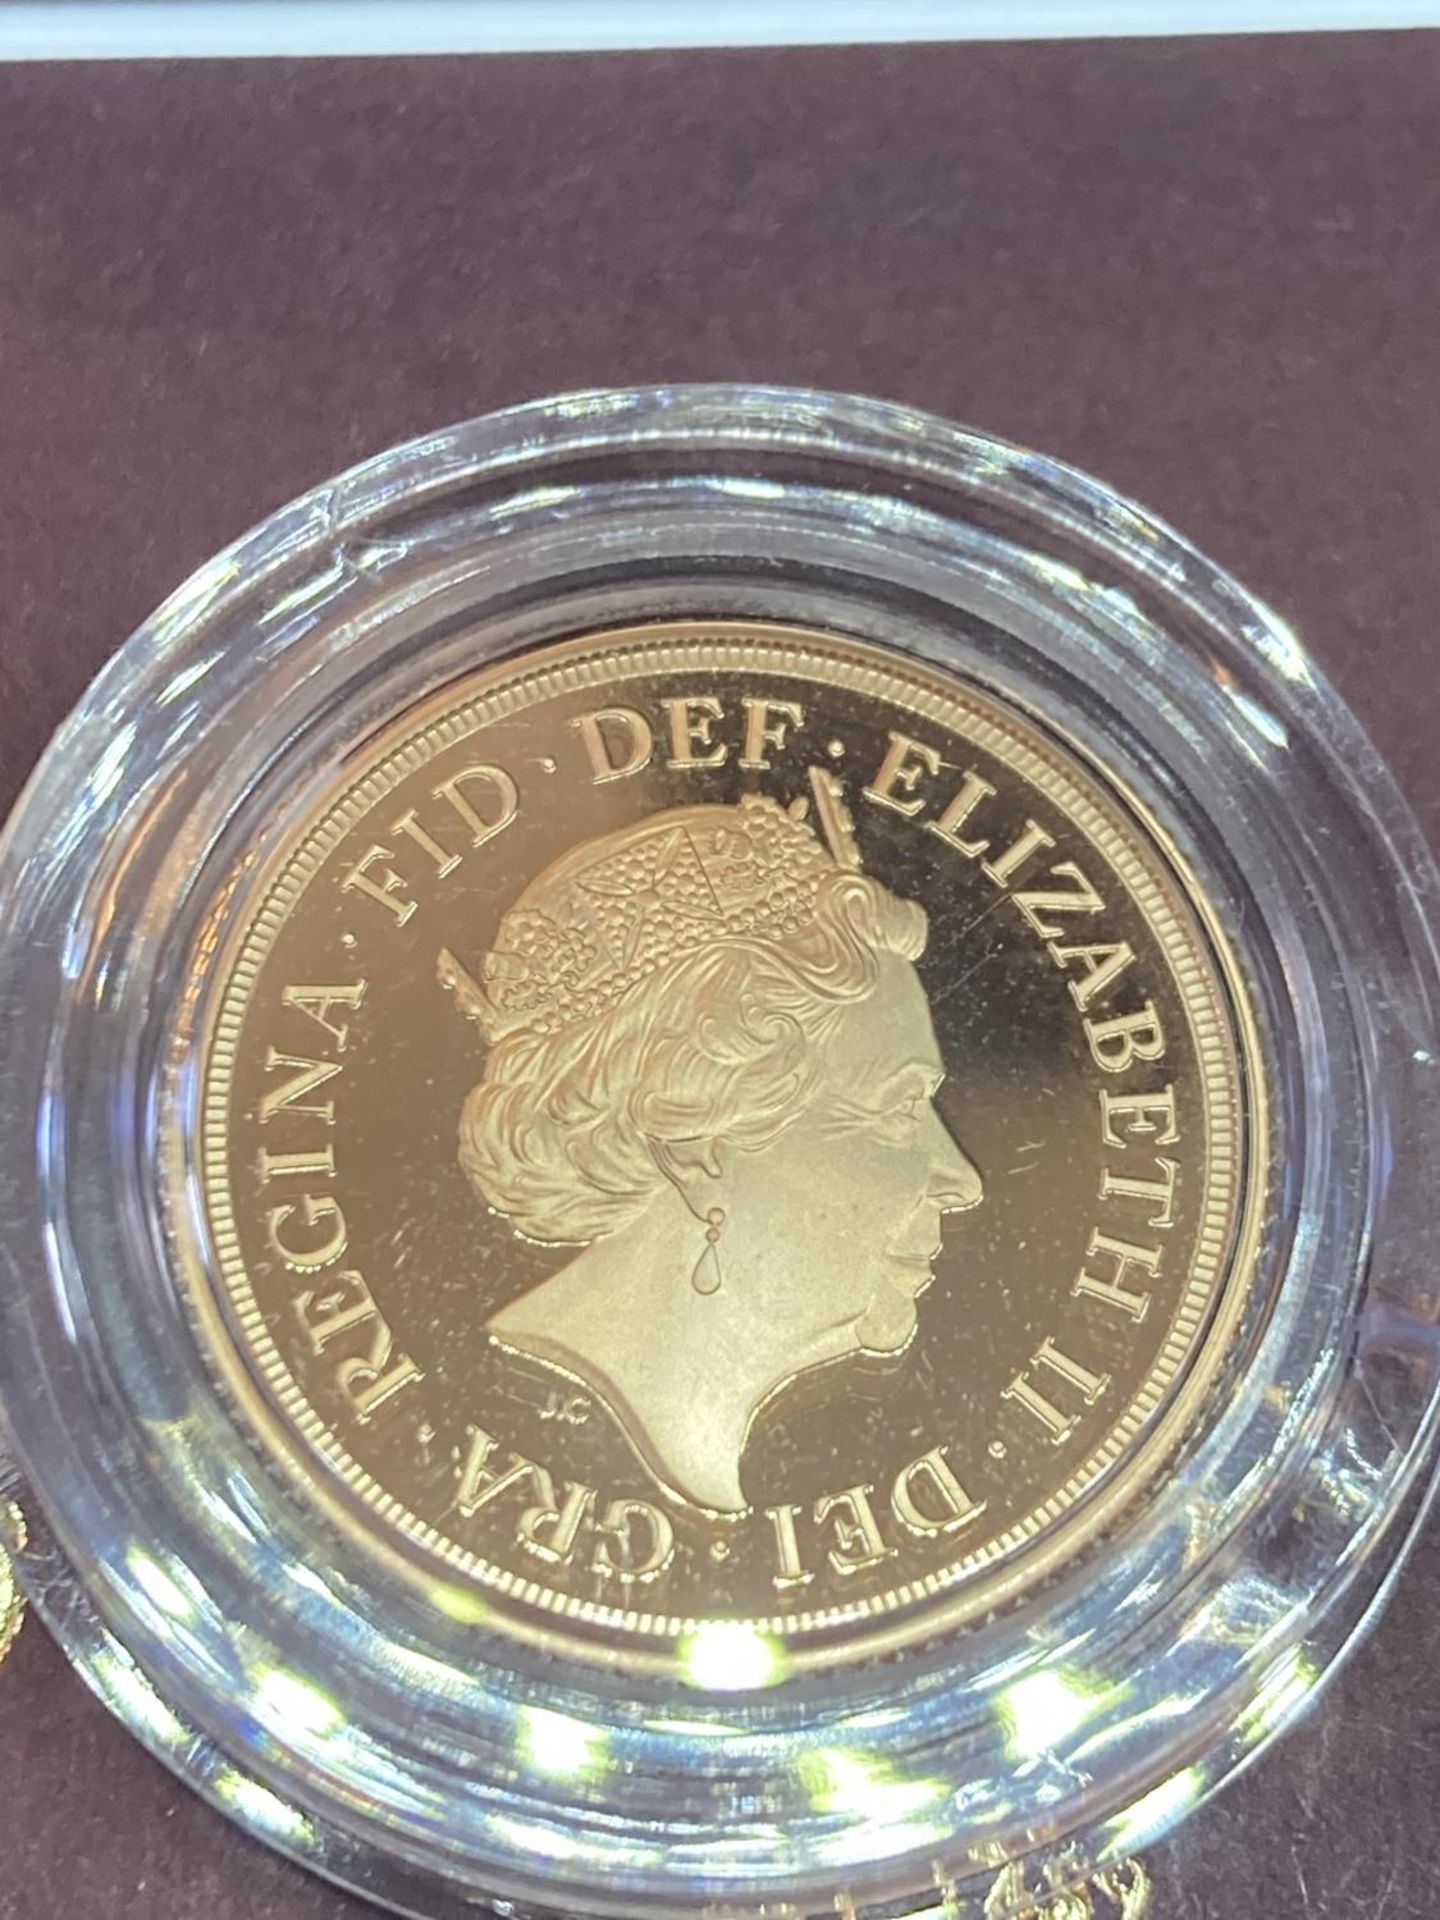 A 2019 THE SOVEREIGN GOLD PROOF LIMITED EDITION NUMBER 6,312 OF 9,500 IN A WOODEN BOXED CASE - Bild 3 aus 5